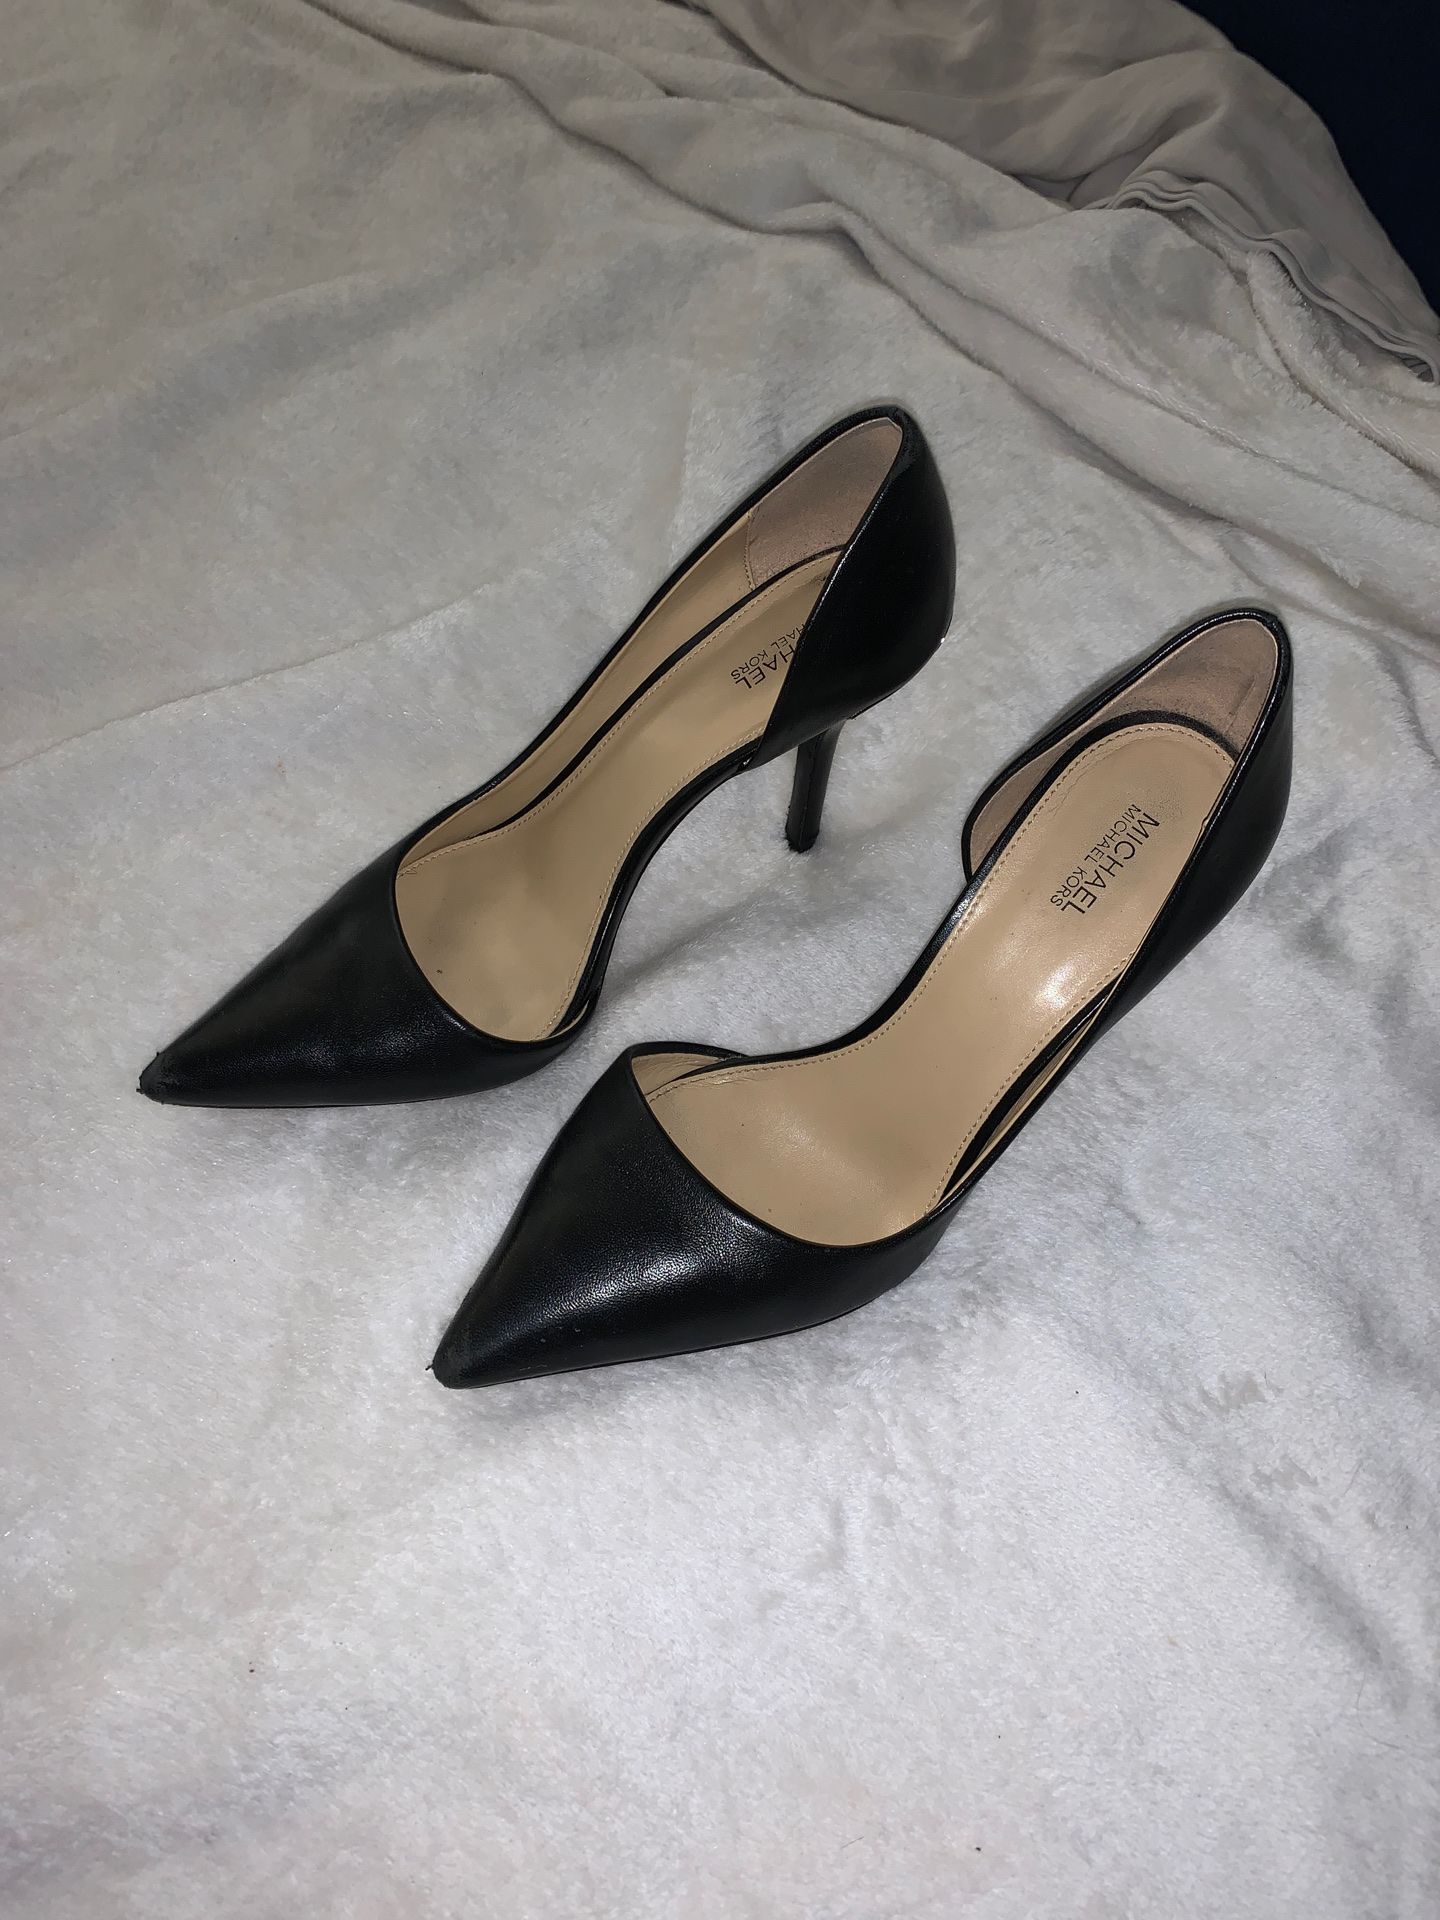 Michael Kors heels and more - free $0 size 8